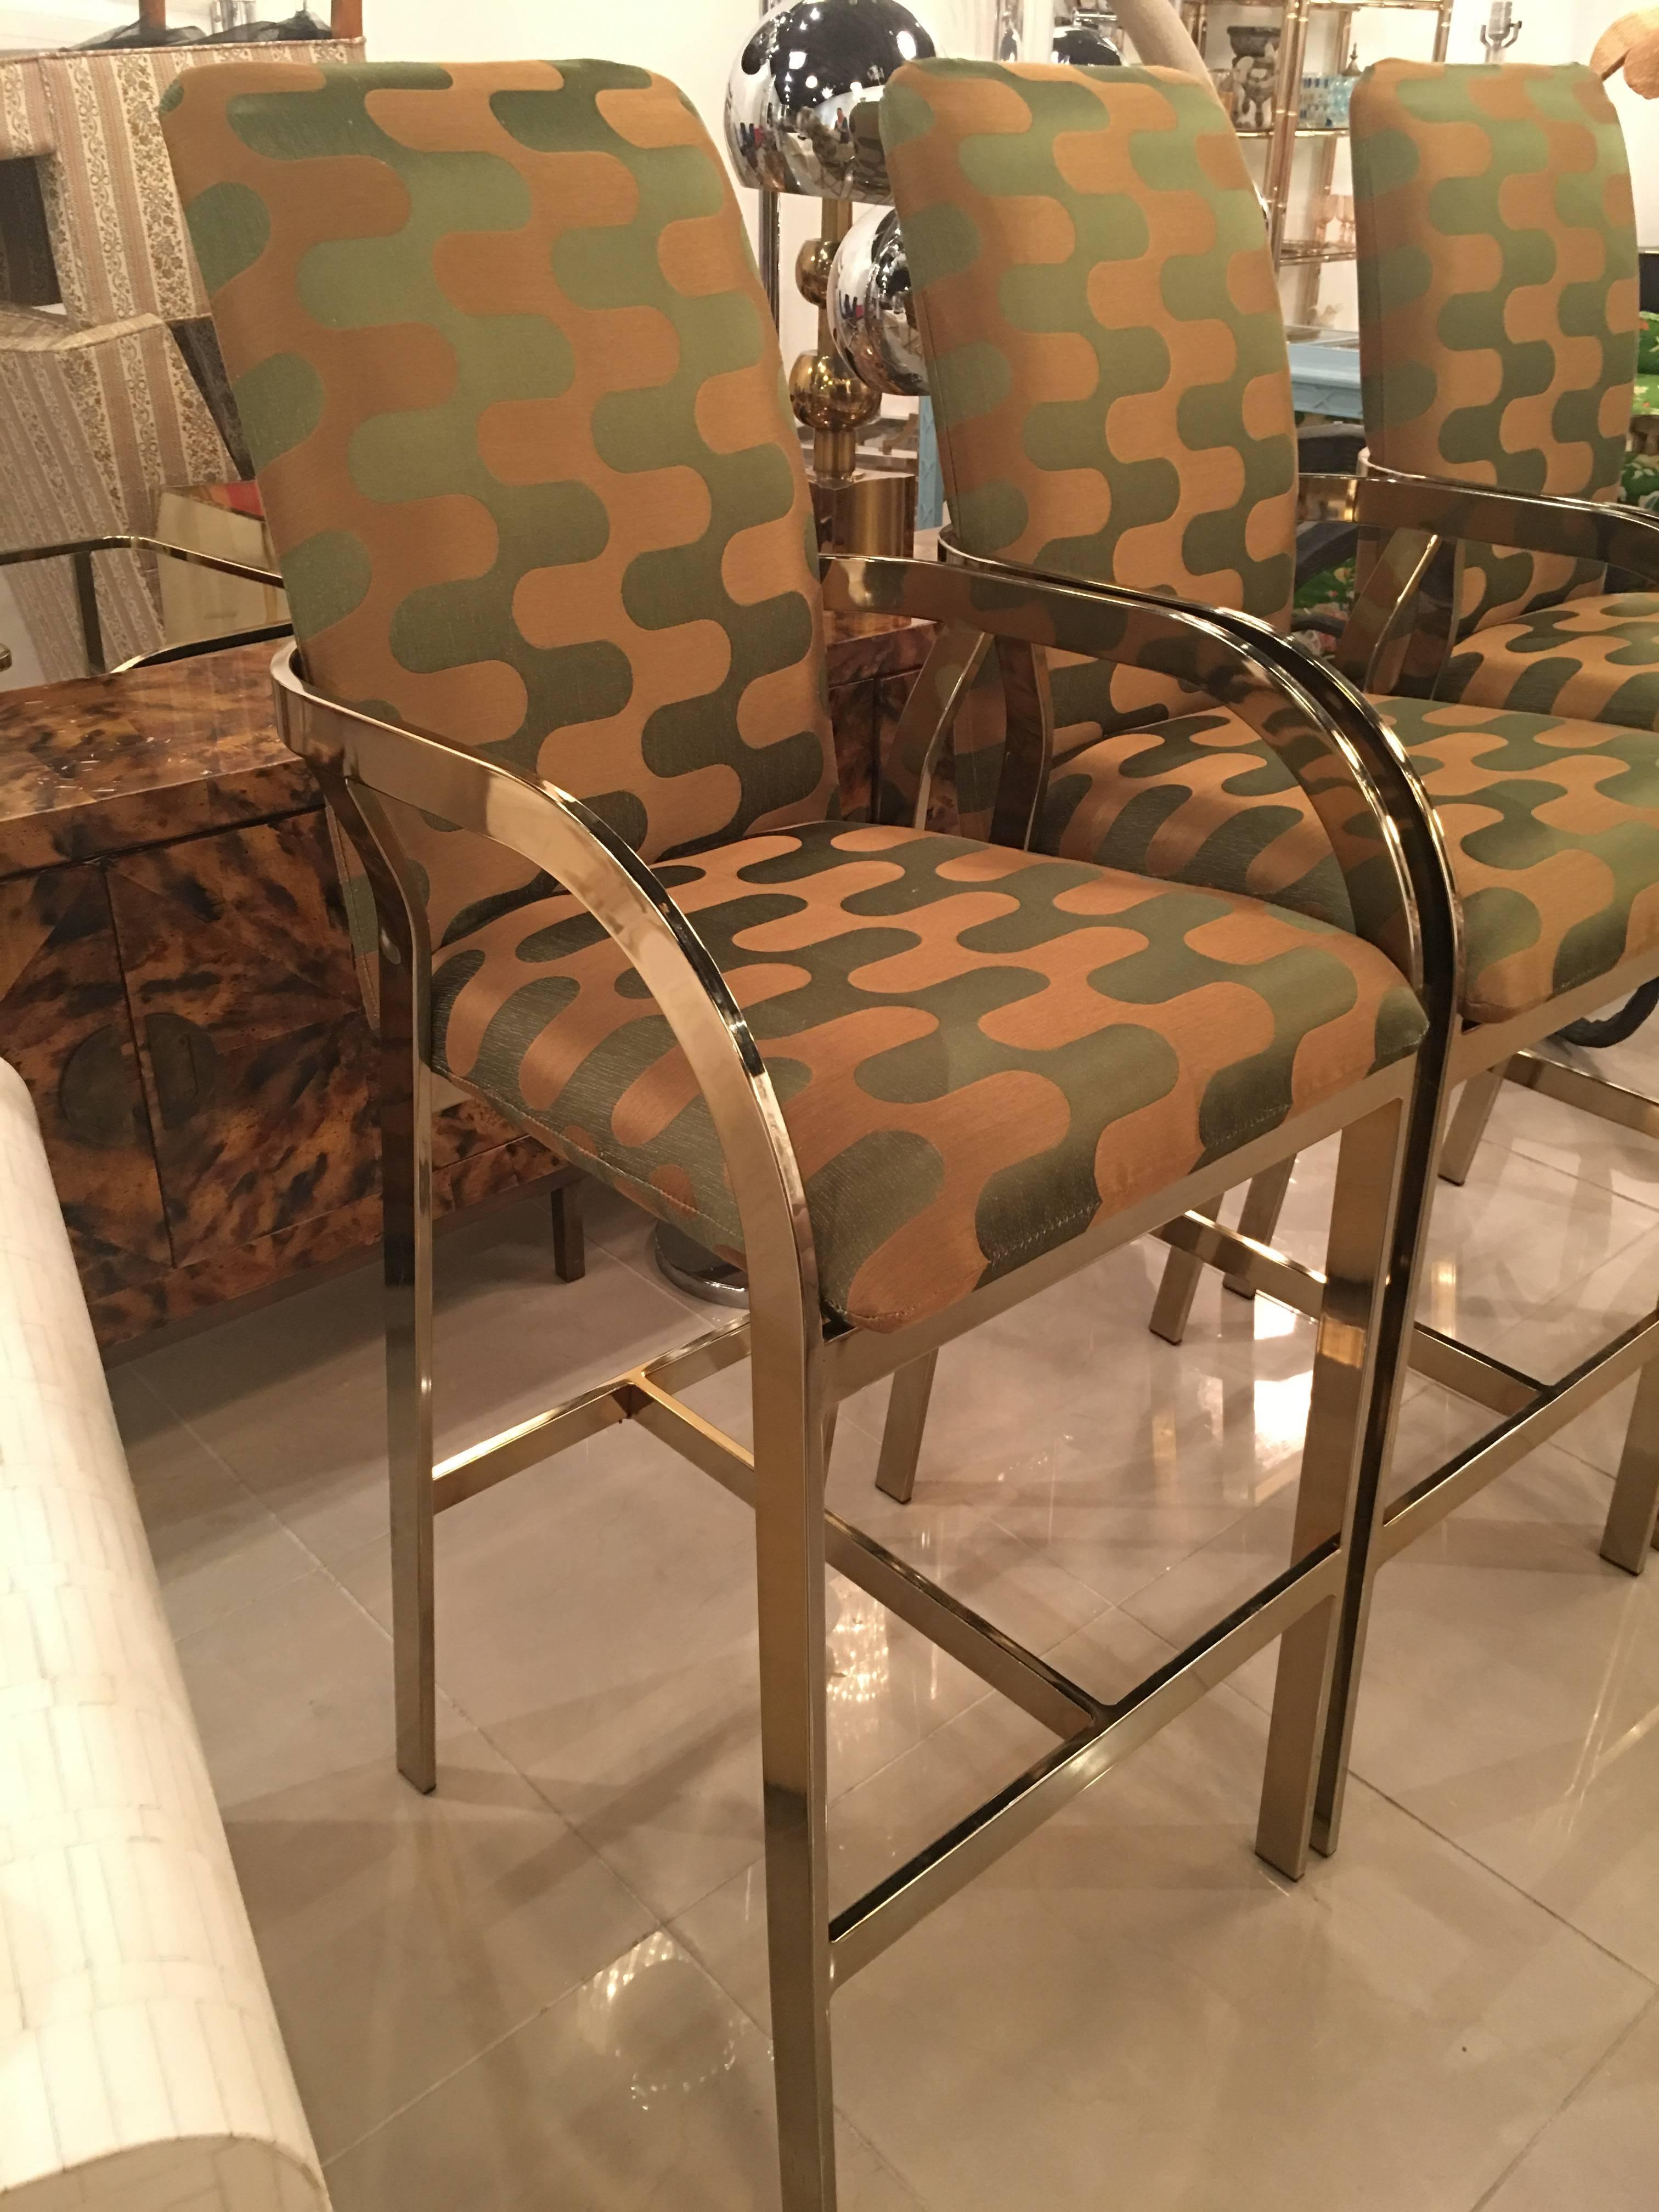 Amazing set of three (3) Hollywood Regency, vintage DIA, Design Institute of America, gold brass barstools bar stools with arms. These have been newly professionally upholstered in a Clarence House fabric. There is one small area which is pictured